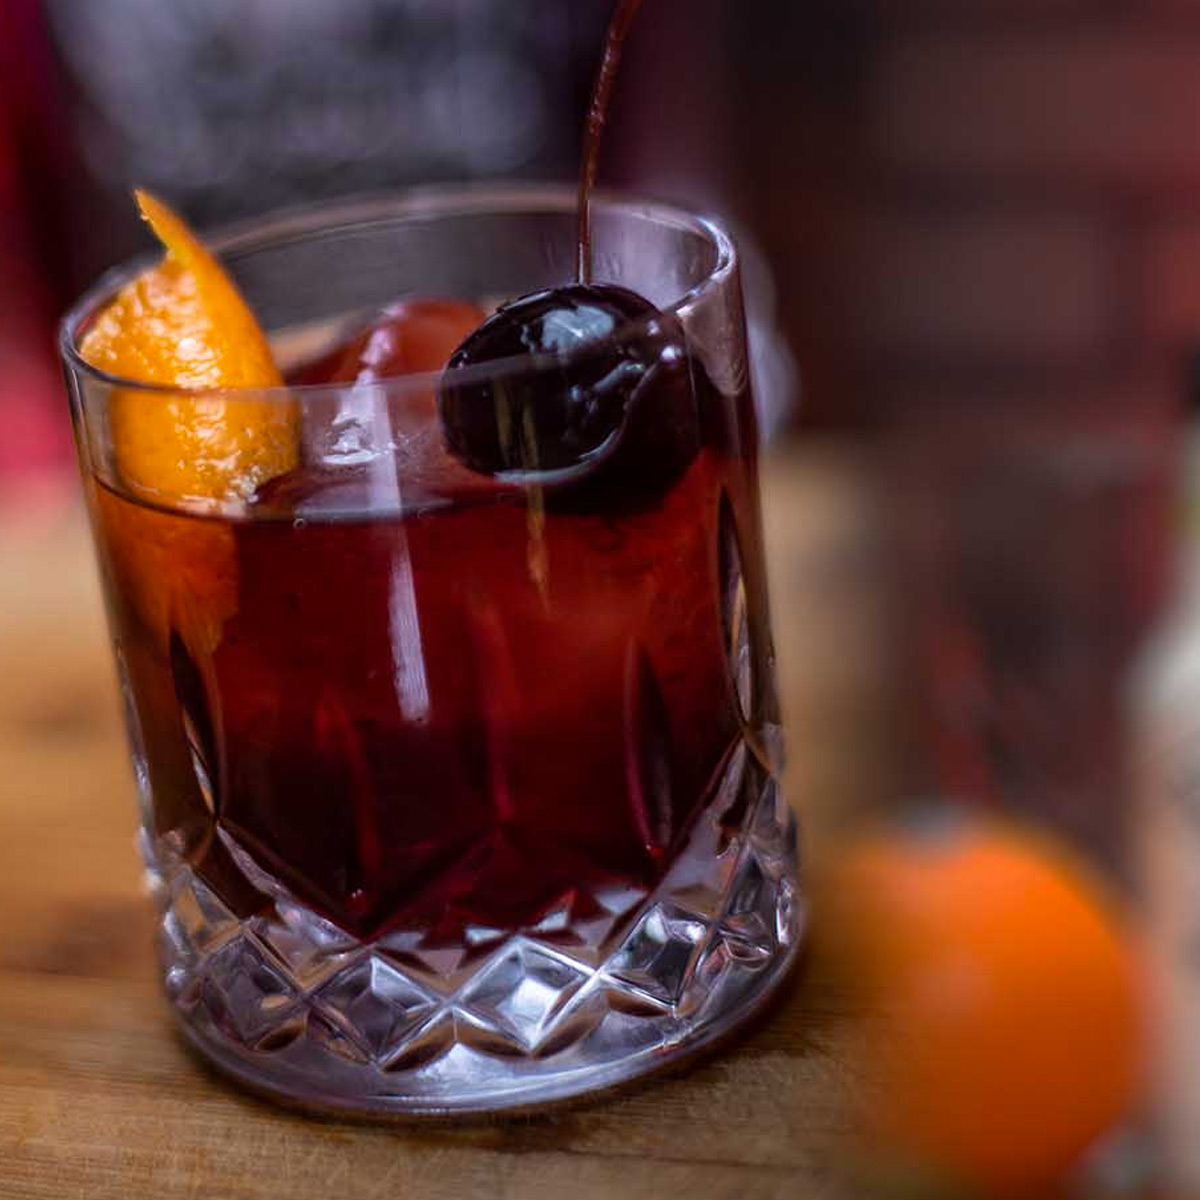 Currant Old fashioned